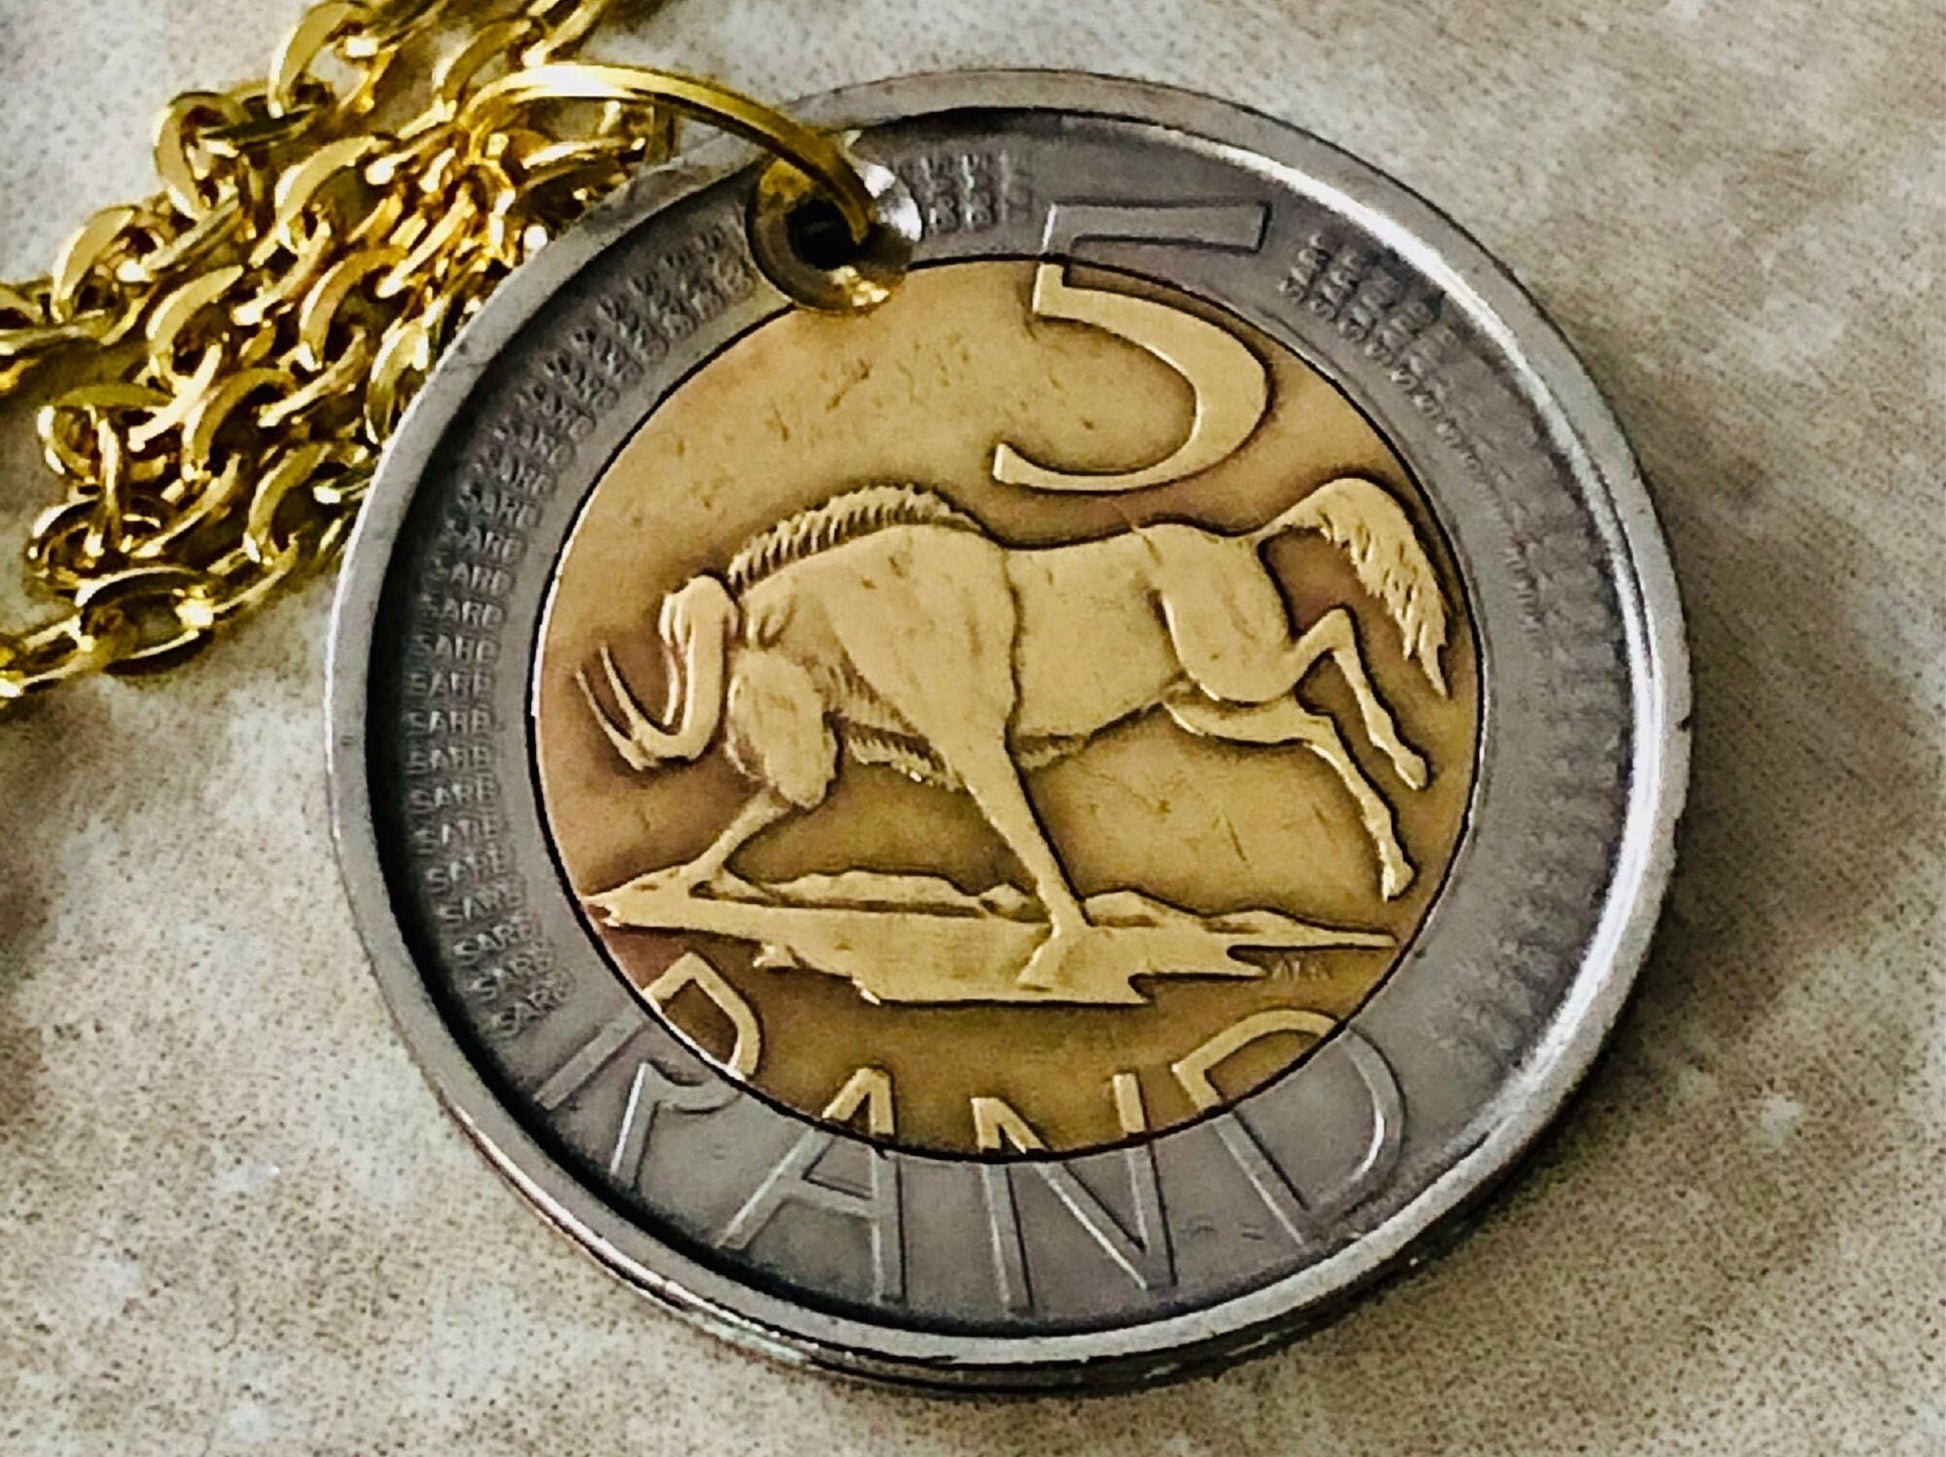 South Africa Necklace 5 RAND Afrika Dzonga Ningizimu Wildebeest Bull Vintage Pendant Jewelry Gift Friend Charm Him Her World Coin Collector